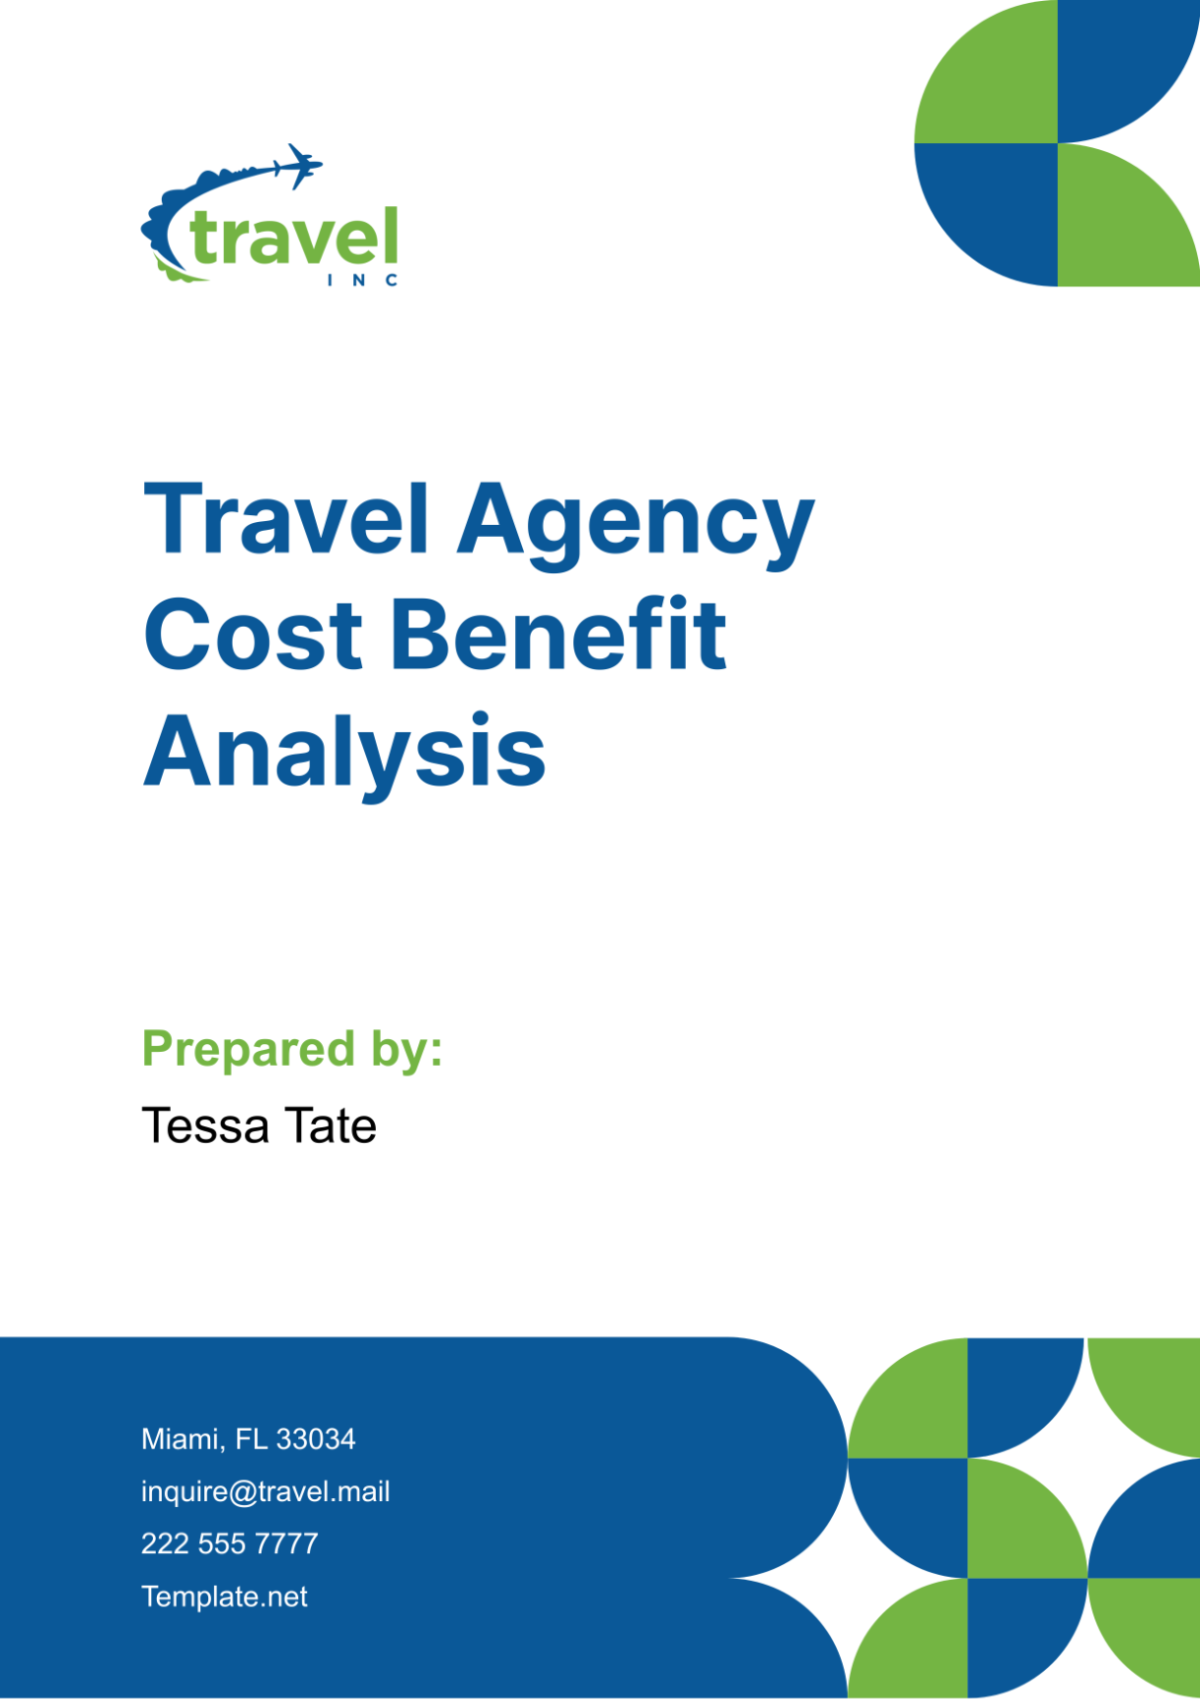 Travel Agency Cost Benefit Analysis Template